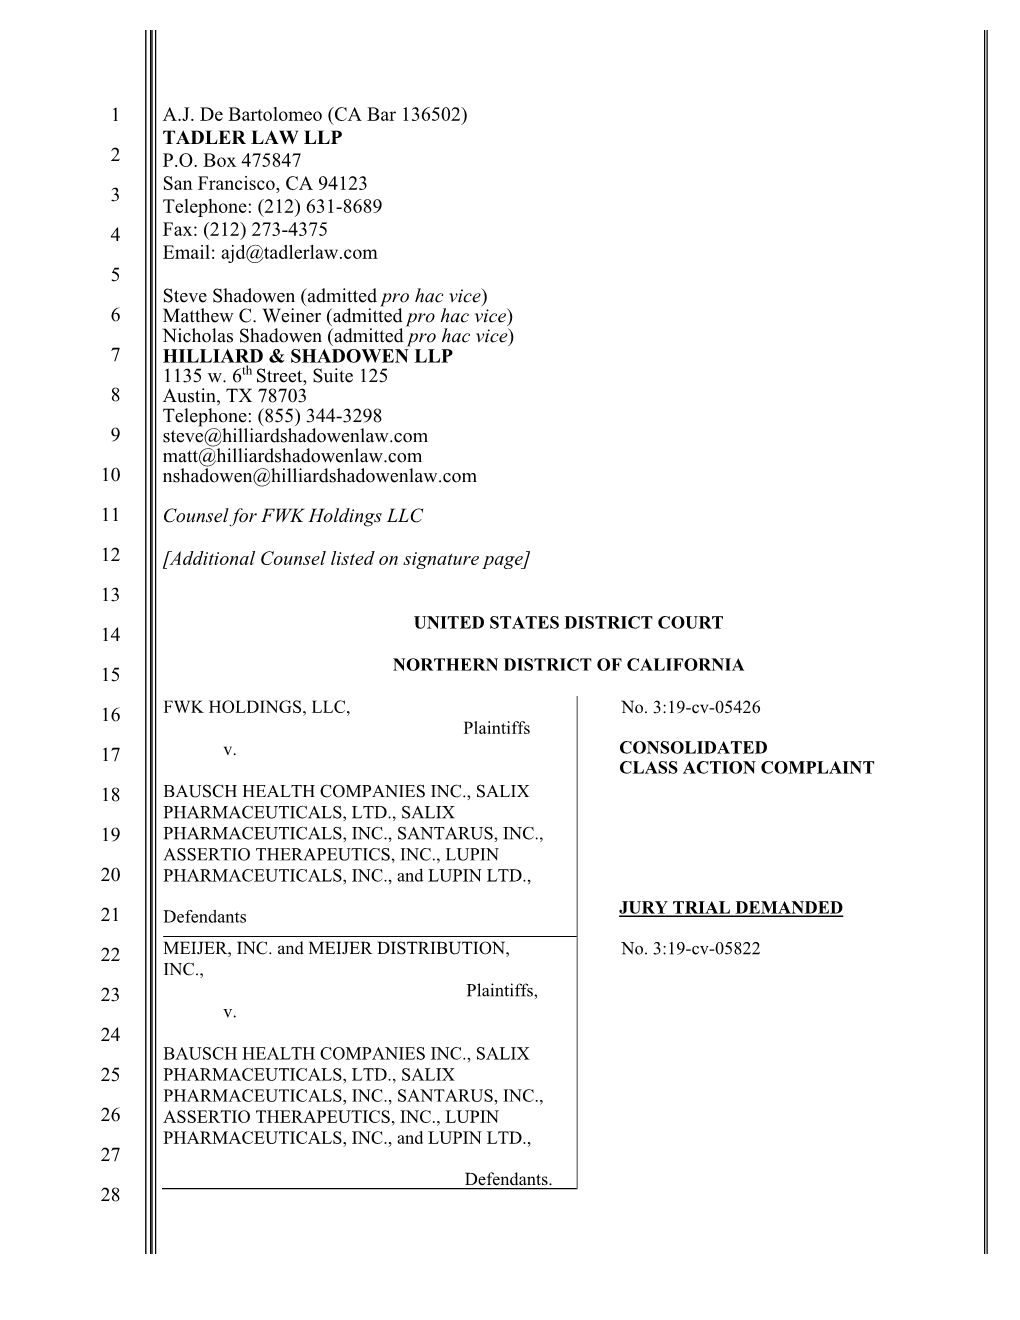 Case 3:19-Cv-06138-WHA Document 44 Filed 11/25/19 Page 1 of 67